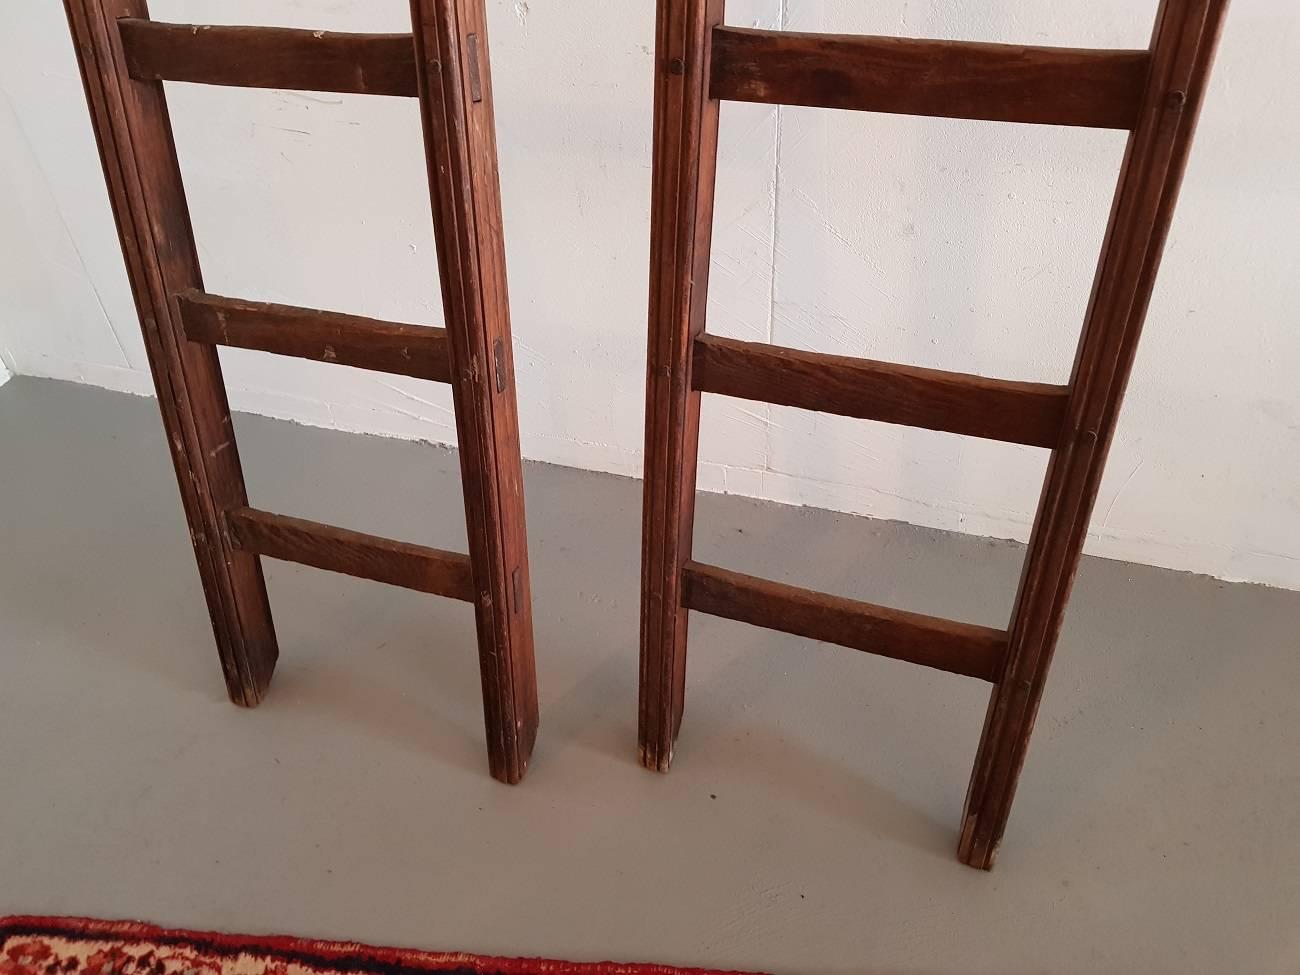 European Early 20th Century Rural Wooden Pinned Ladders